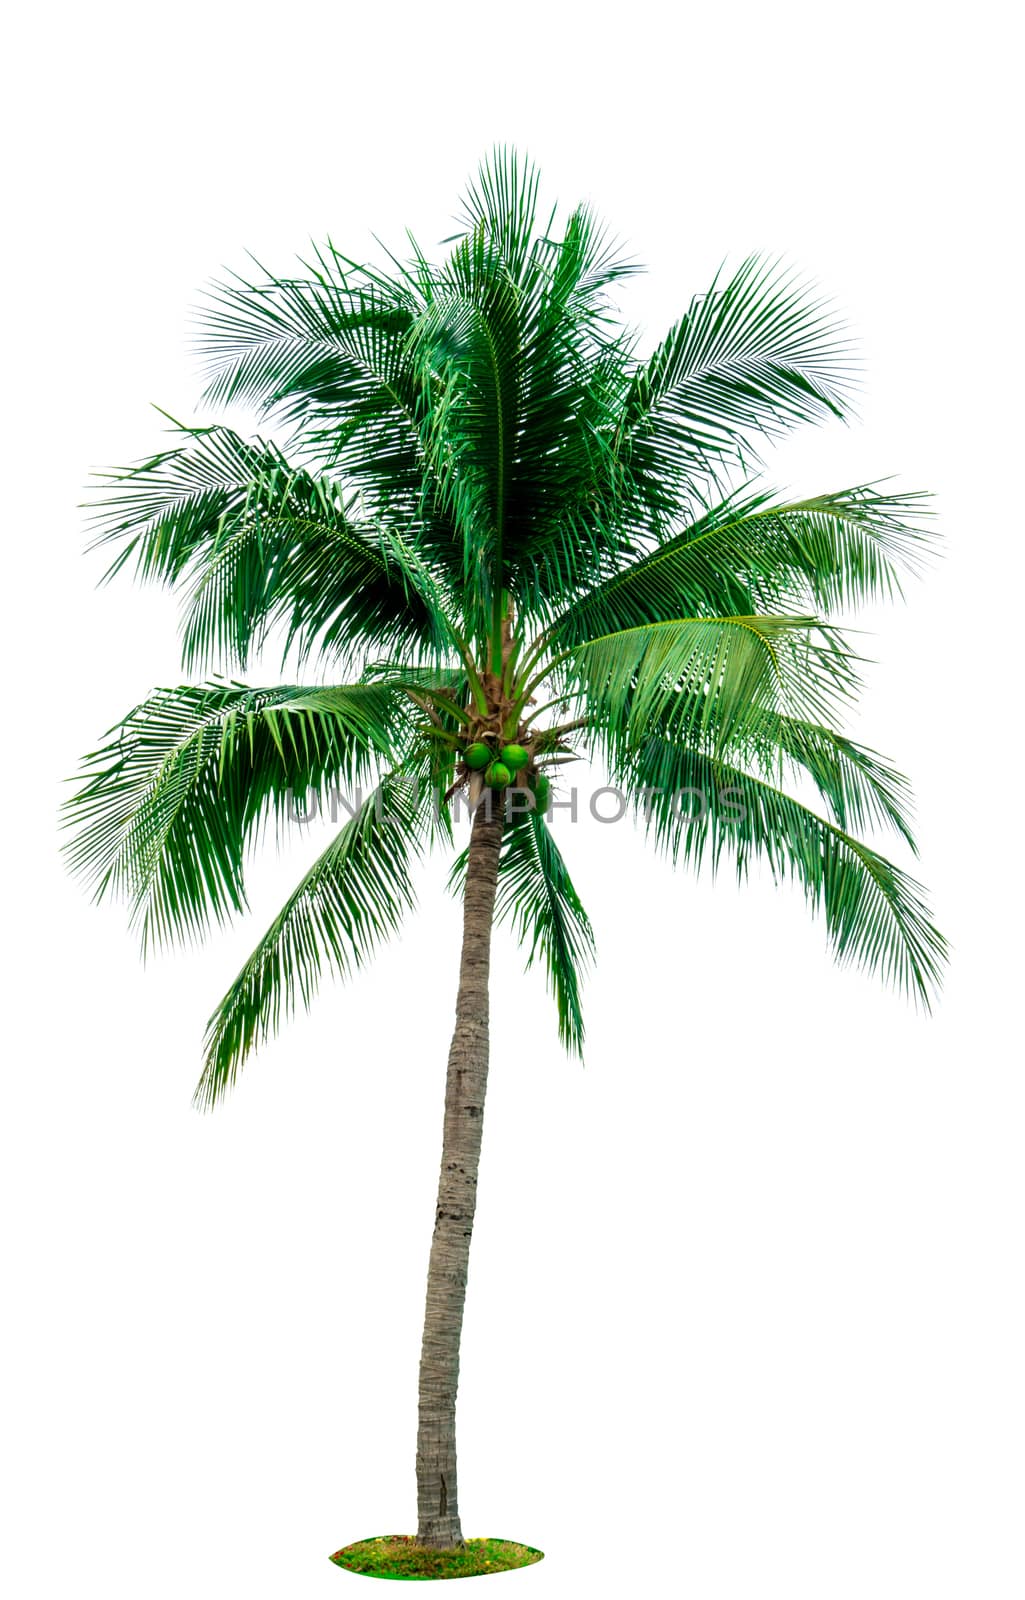 Coconut tree isolated on white background with copy space. Used for advertising decorative architecture. Summer and beach concept. Tropical palm tree. by Fahroni